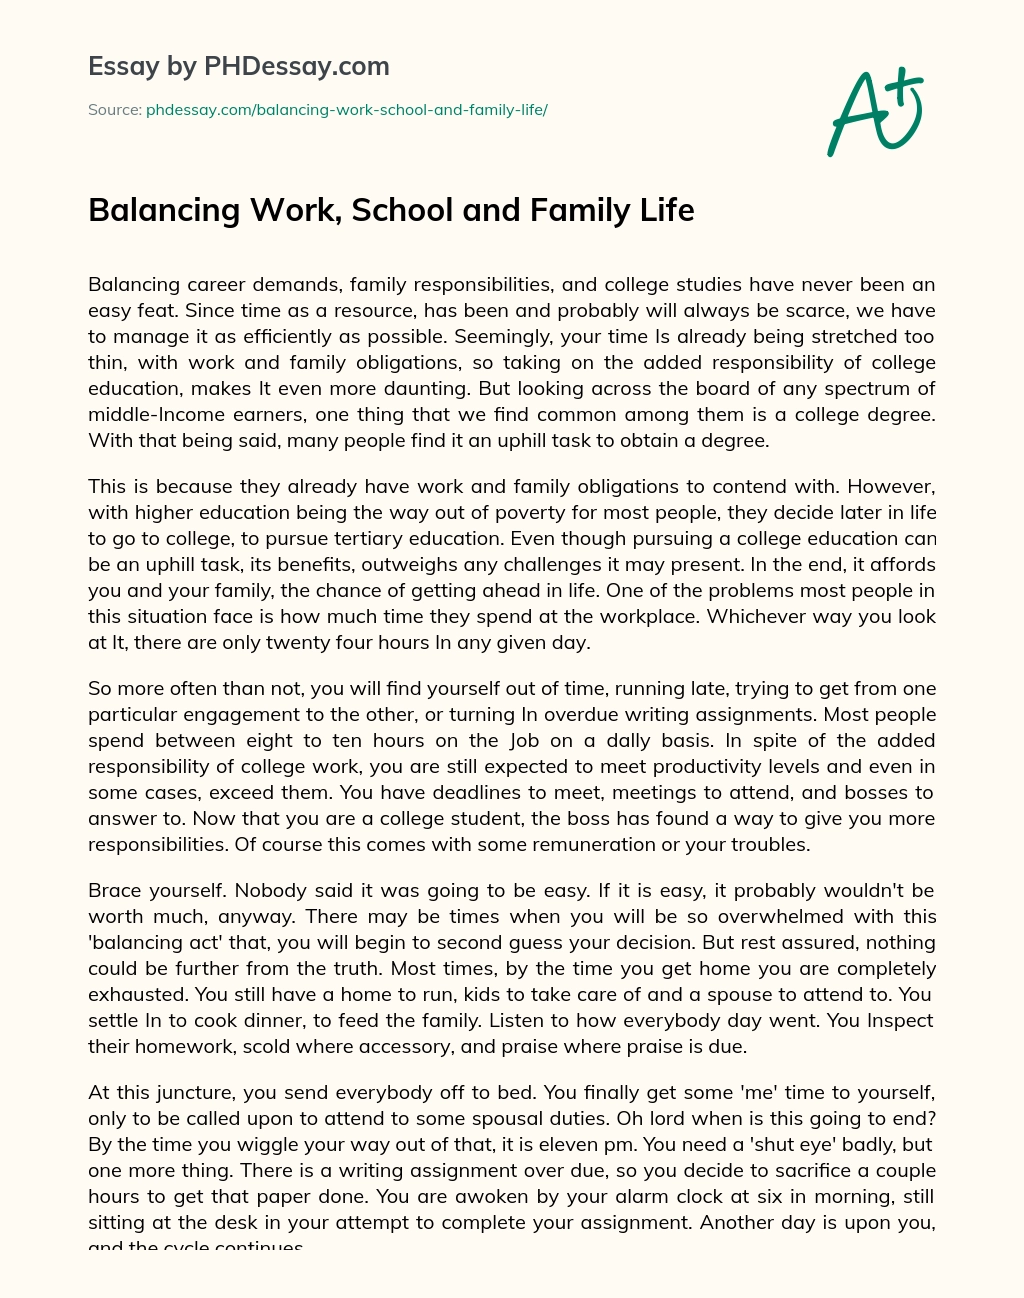 Balancing Work, School and Family Life essay